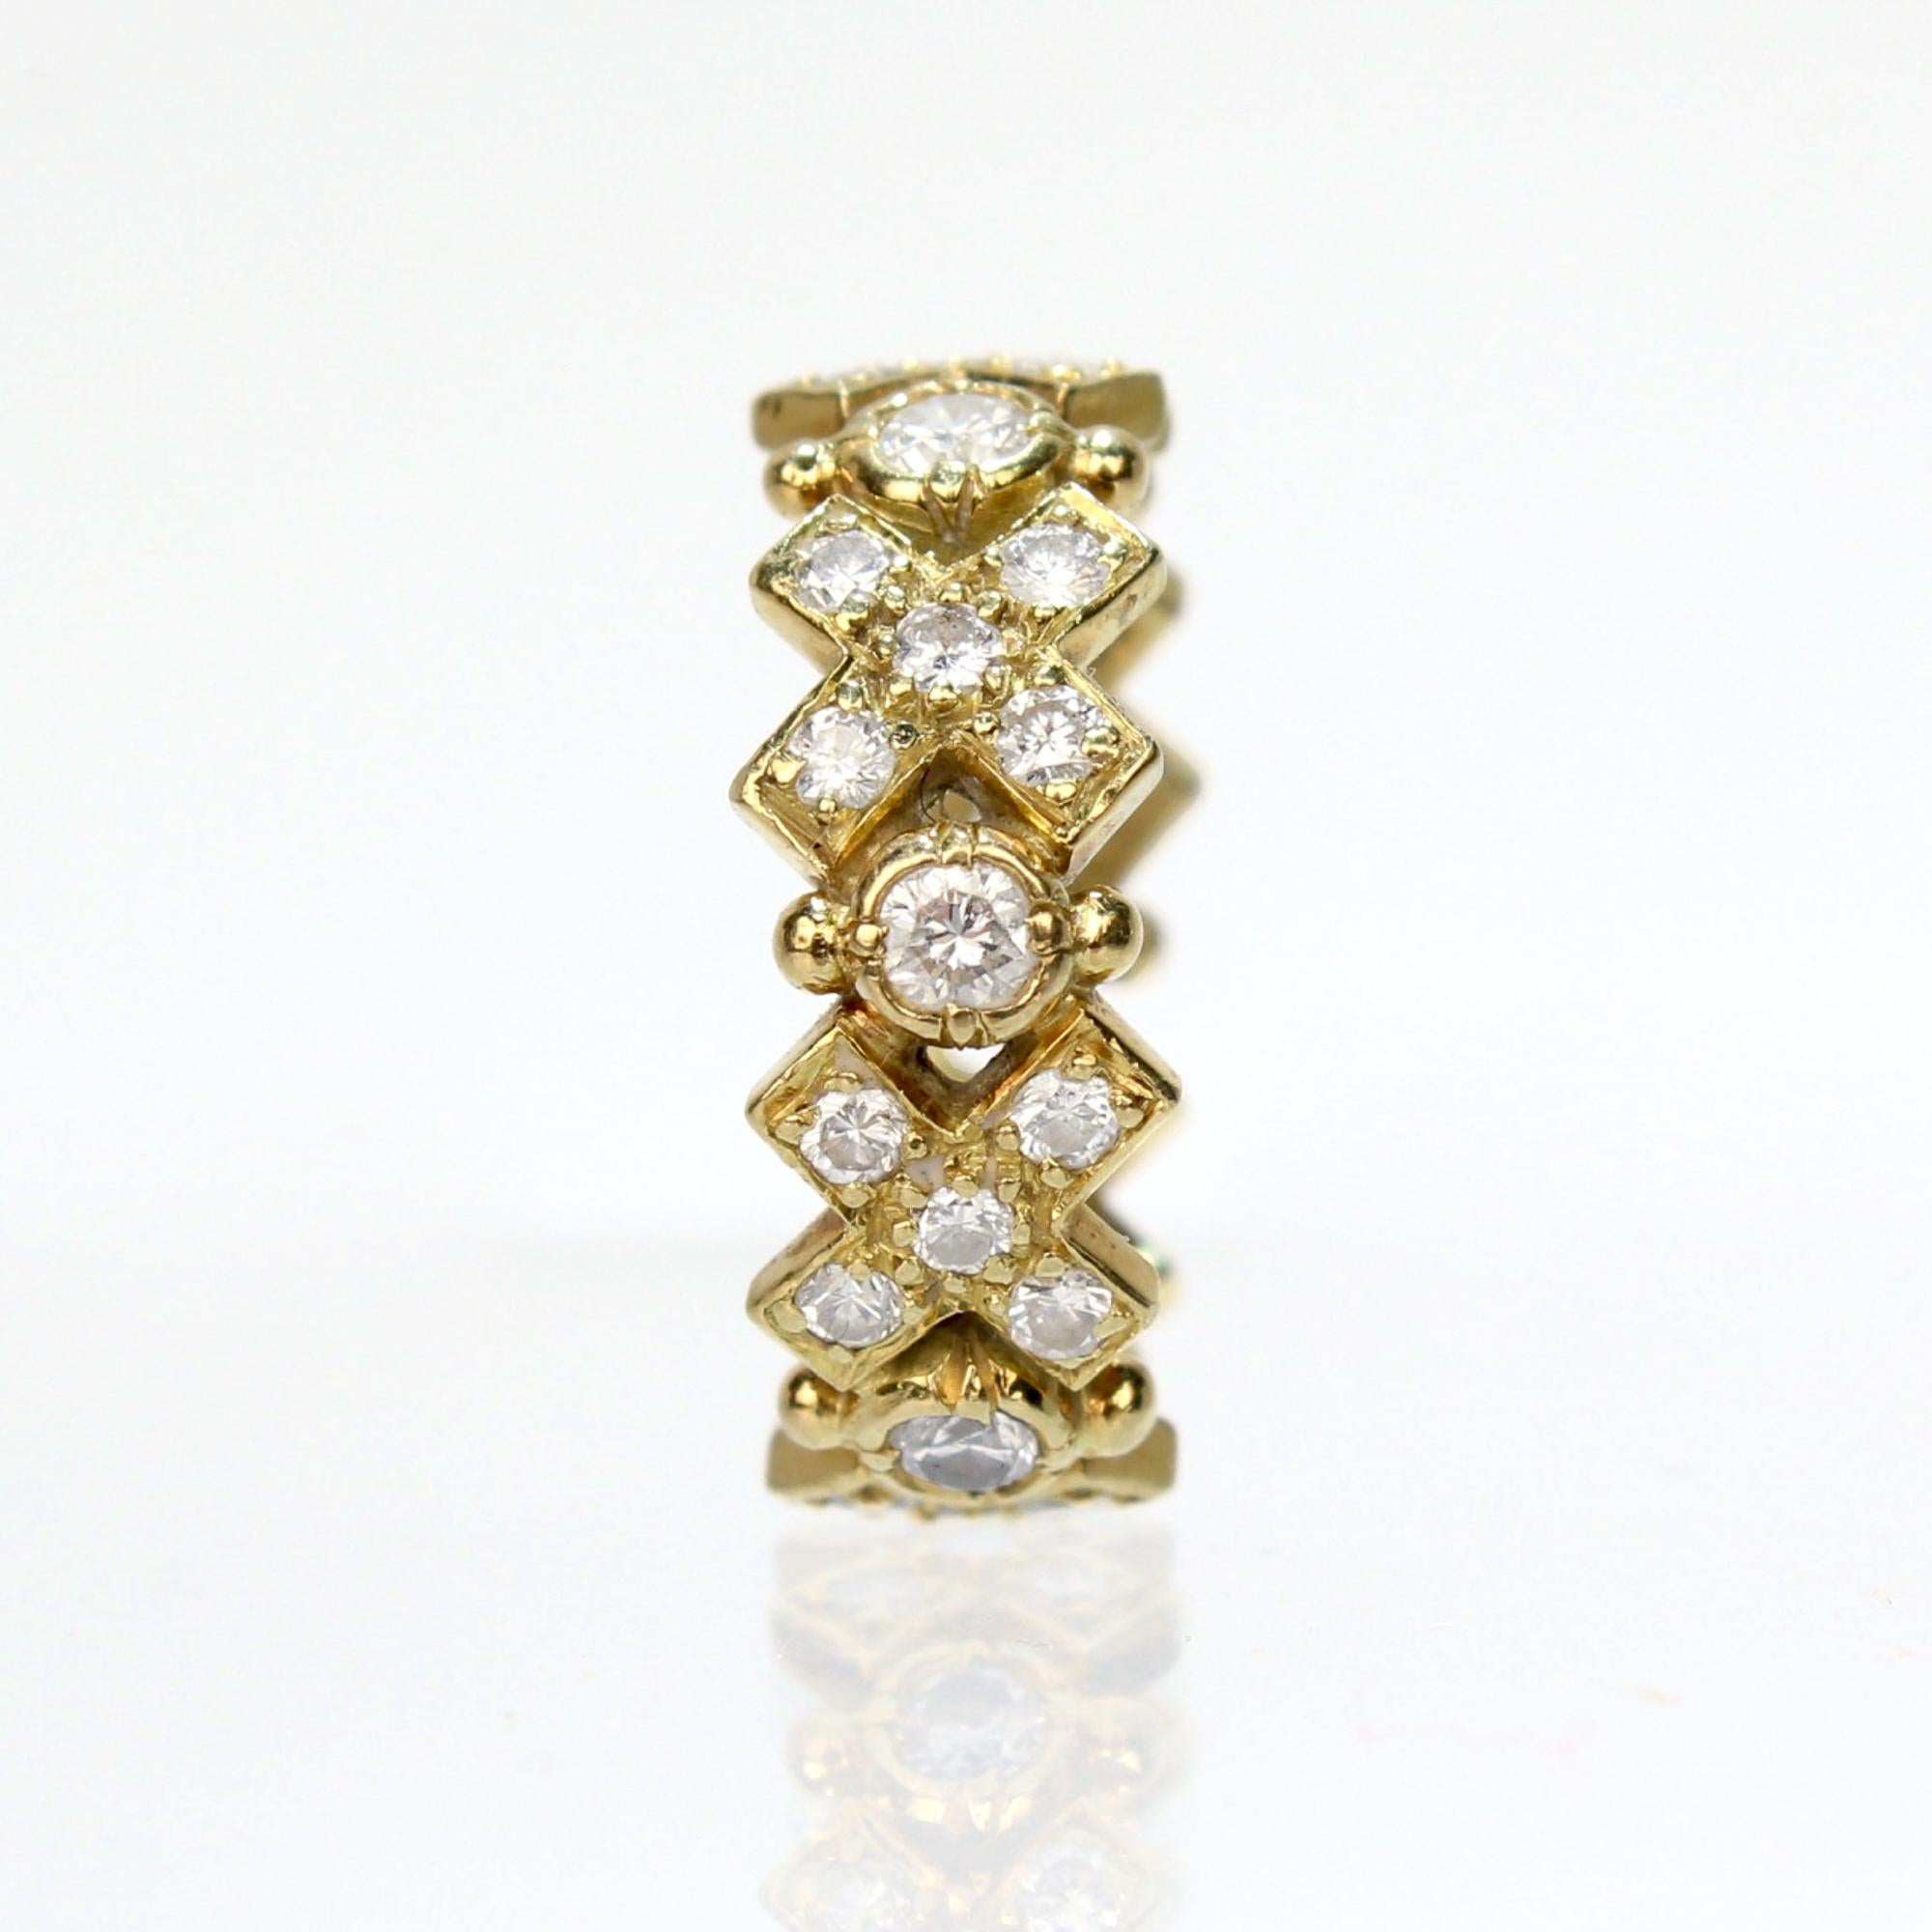 Elizabeth Gage 18 Karat Gold and Diamond Hugs and Kisses Band Ring In Good Condition For Sale In Philadelphia, PA